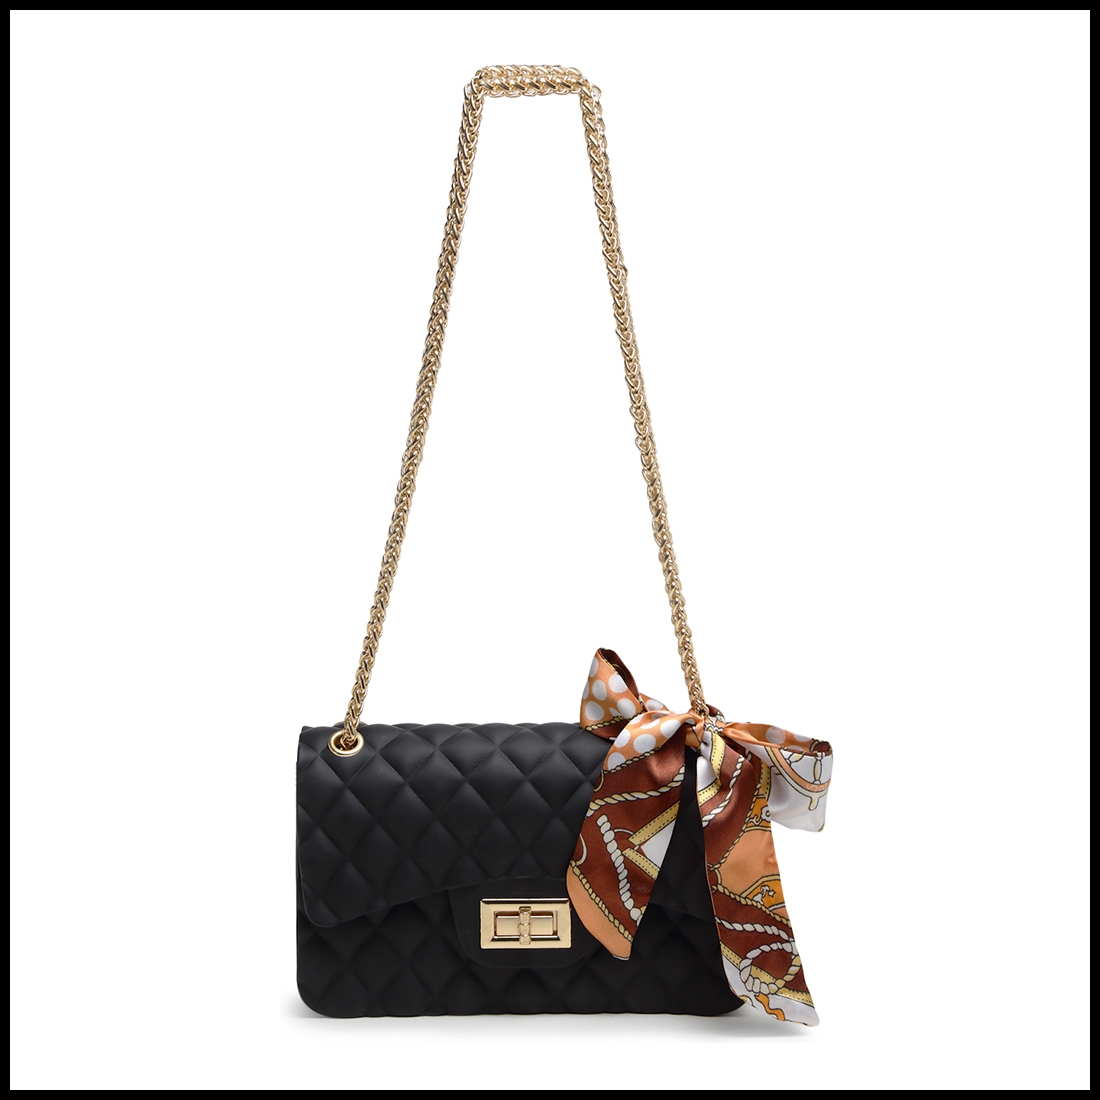 The Haul Factory | The Haul Factory Bold Black Rubber Checkered Patterned Shoulder Sling Bag with Designer Scarf For Women